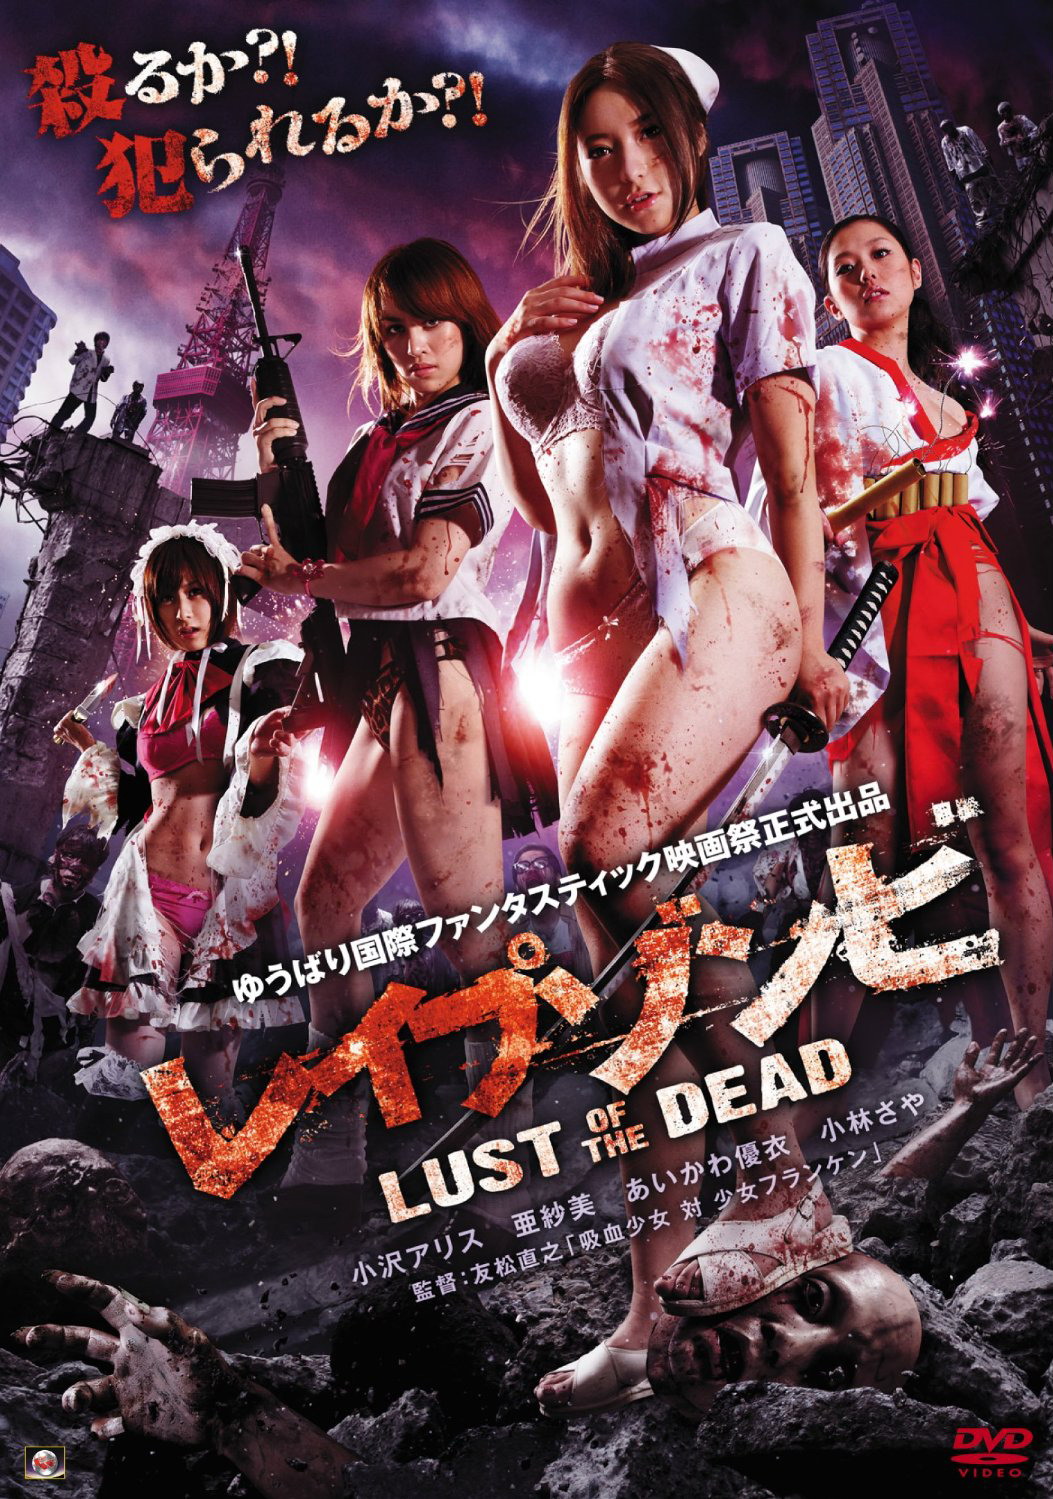 Japanese Porn Movies 2012 - Film Review: Rape Zombie: Lust of the Dead (2012) | HNN